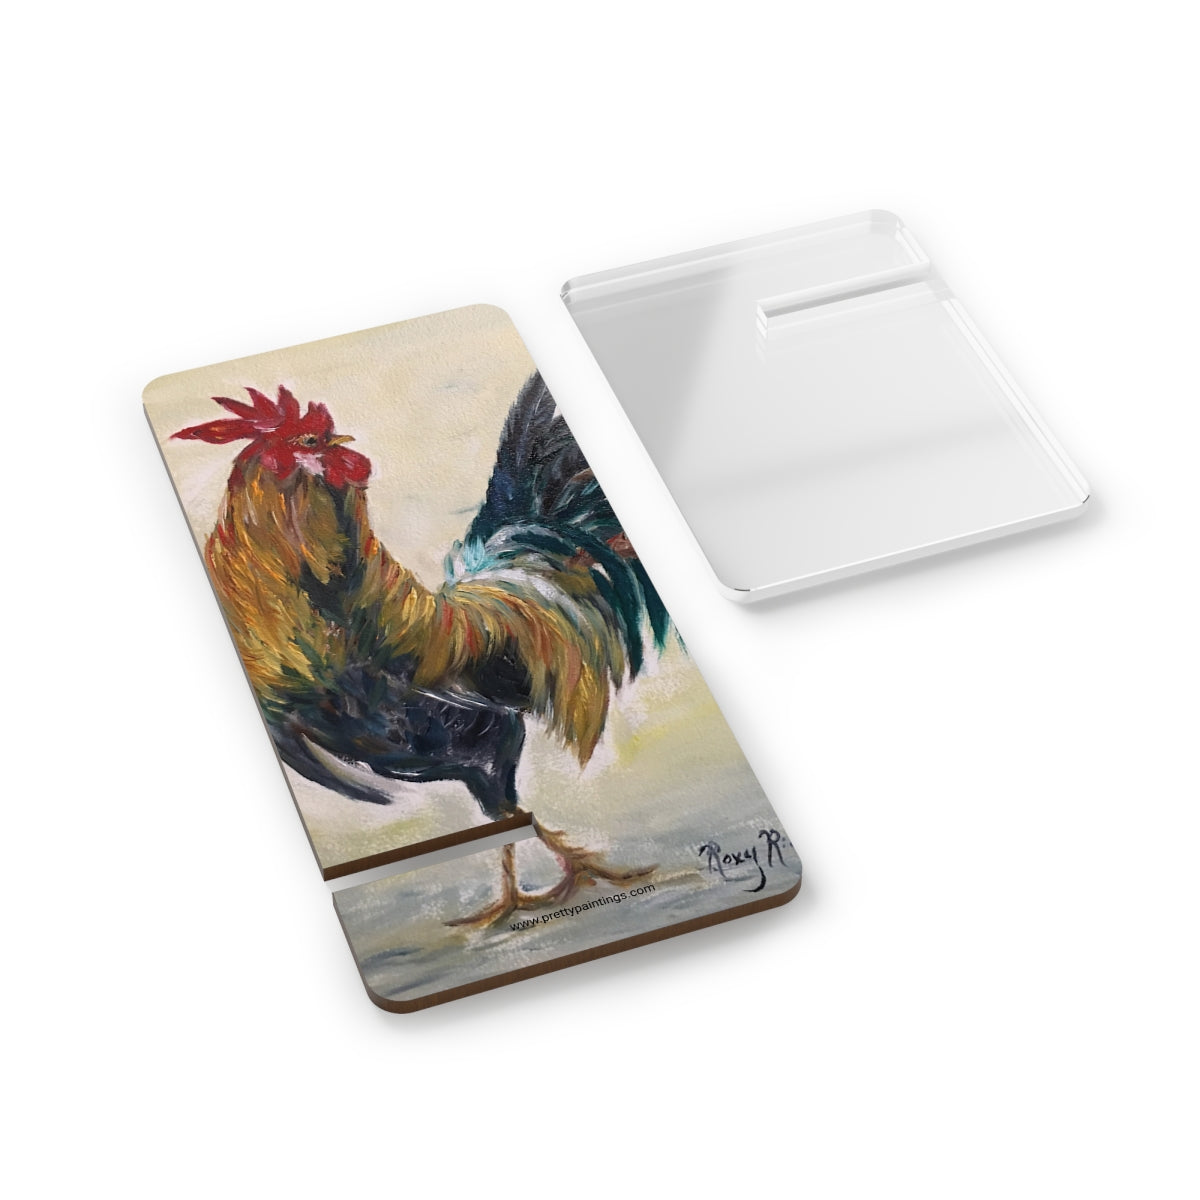 Who You Calling Chicken? (Rooster) Cell Phone Stand